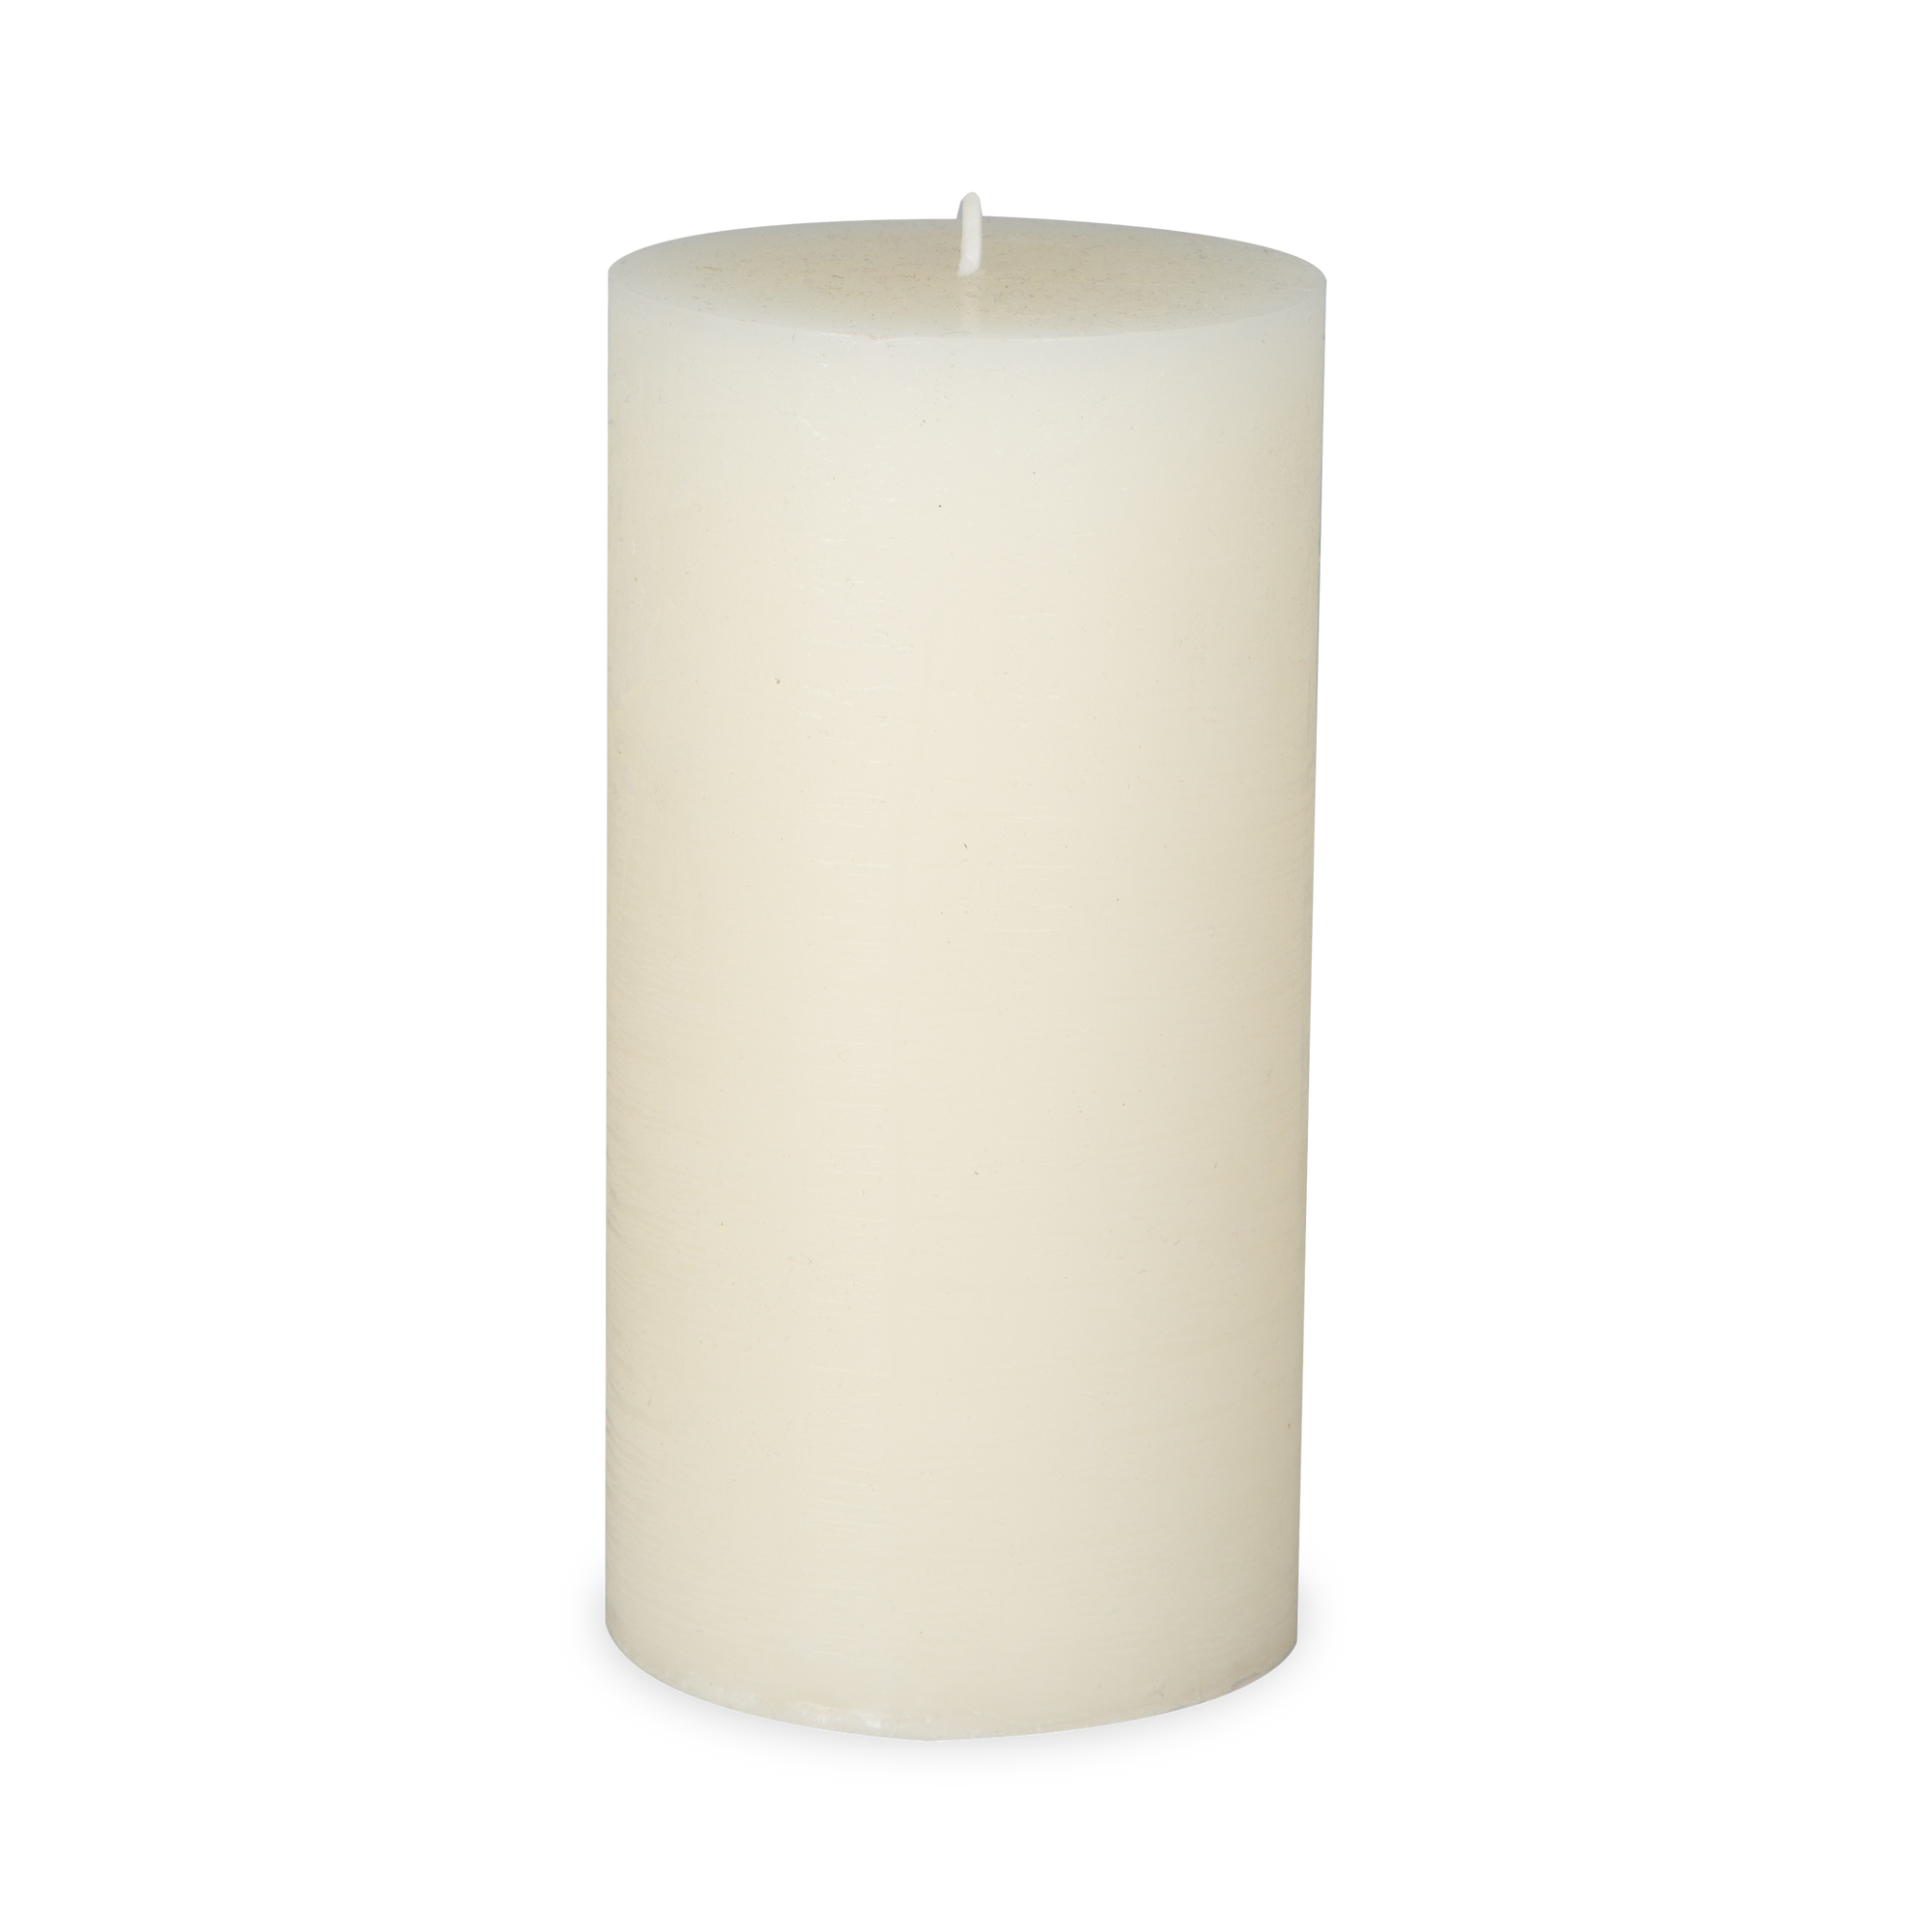 The Pillar Candle is a long-burning, fragrance free, pillar candles with a rustic textured finish, these candles are solid colour throughout.